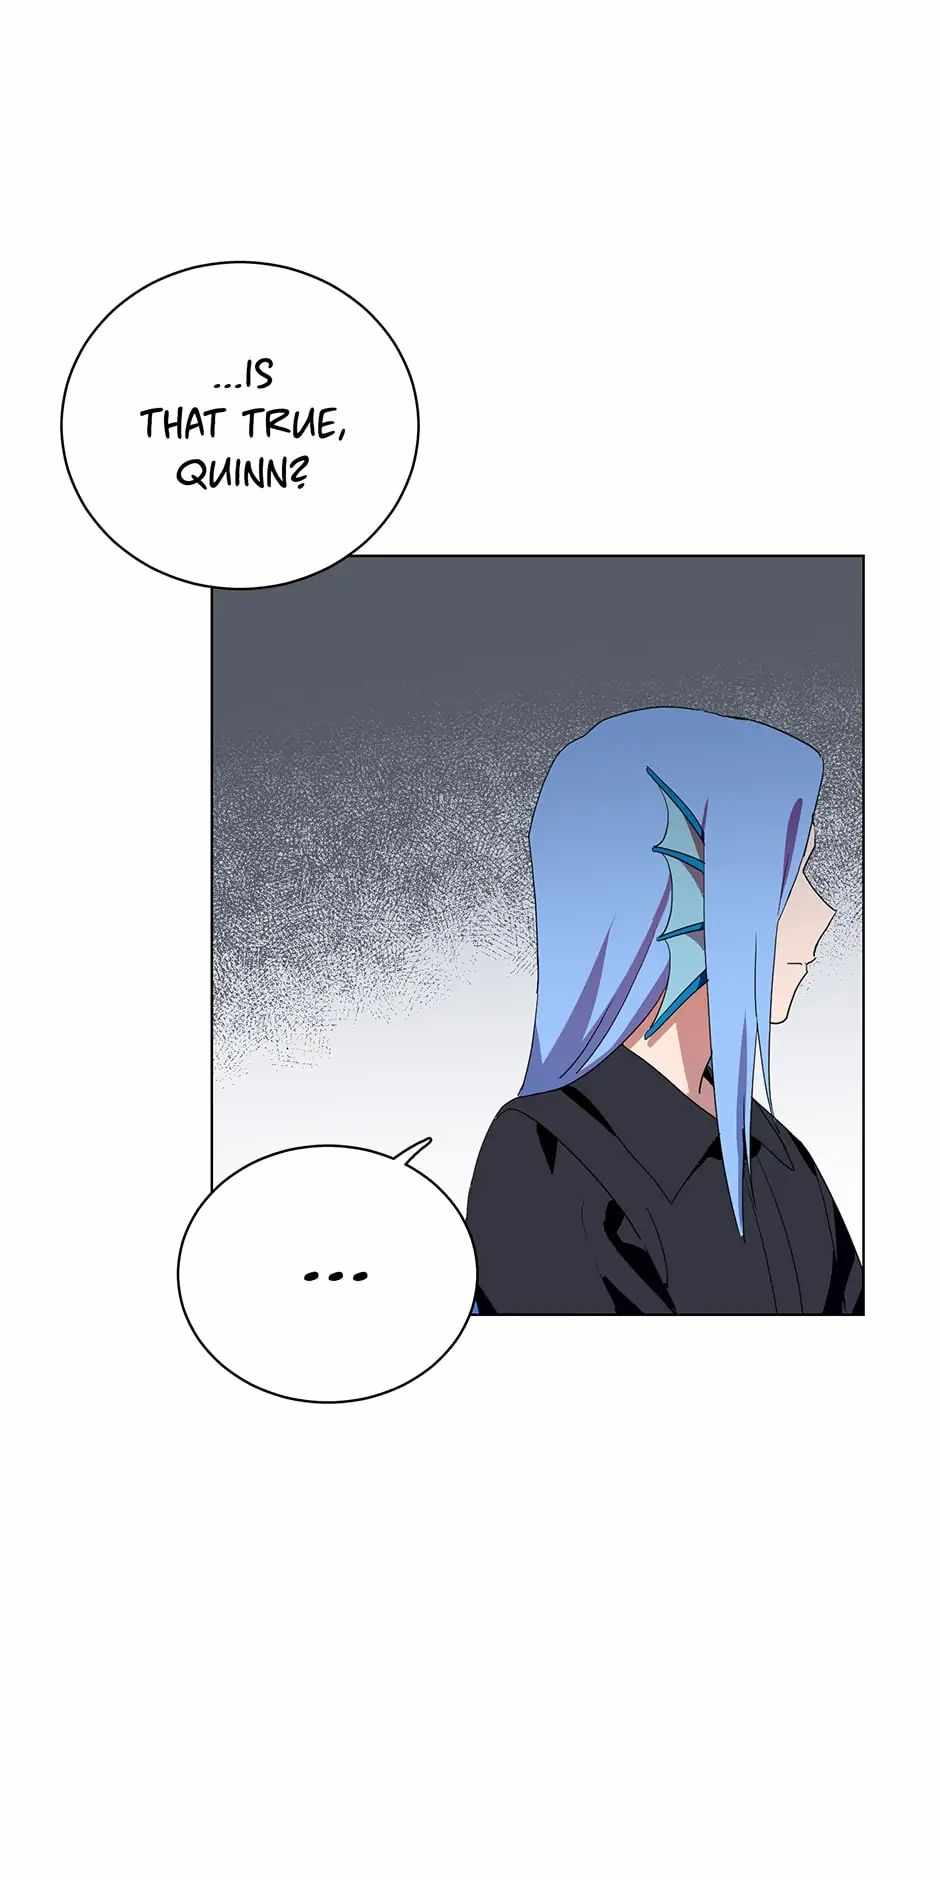 Pendant of the Nymph Chapter 139-eng-li - Page 21